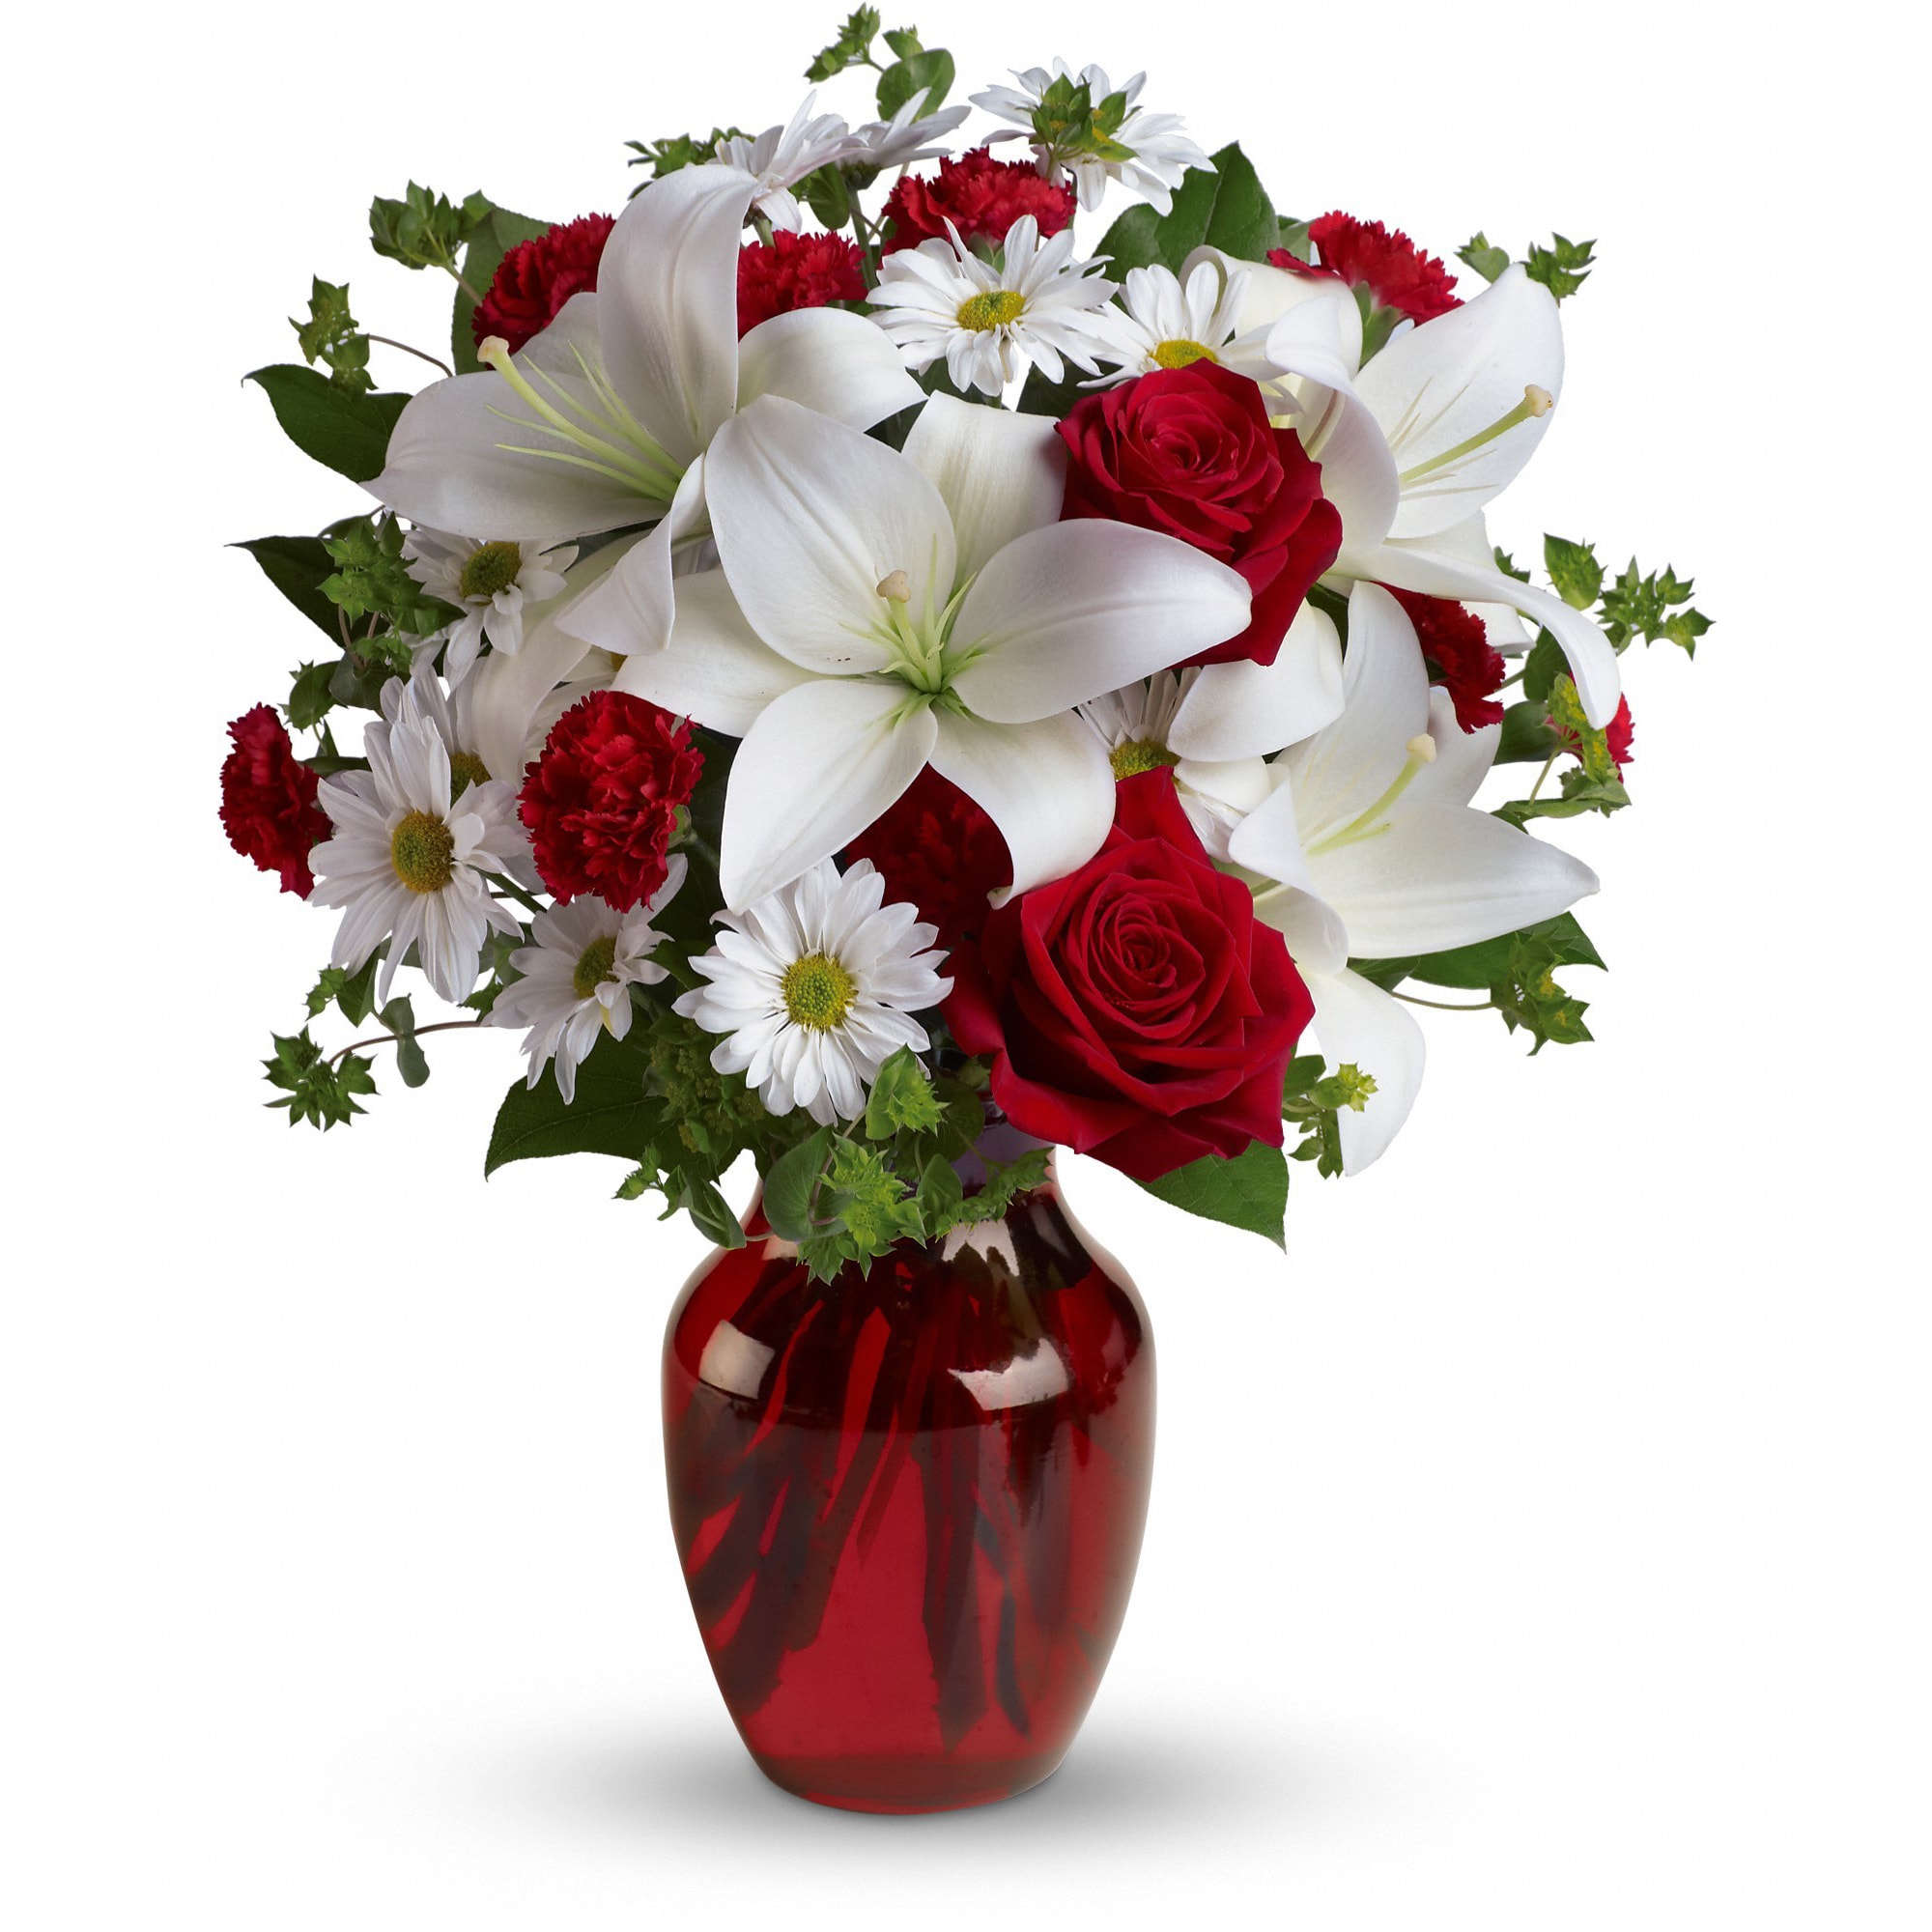 Be My Love Bouquet by Teleflora - The spirit of love and romance is beautifully captured in this enchanting bouquet. It's the perfect gift for anyone you love.